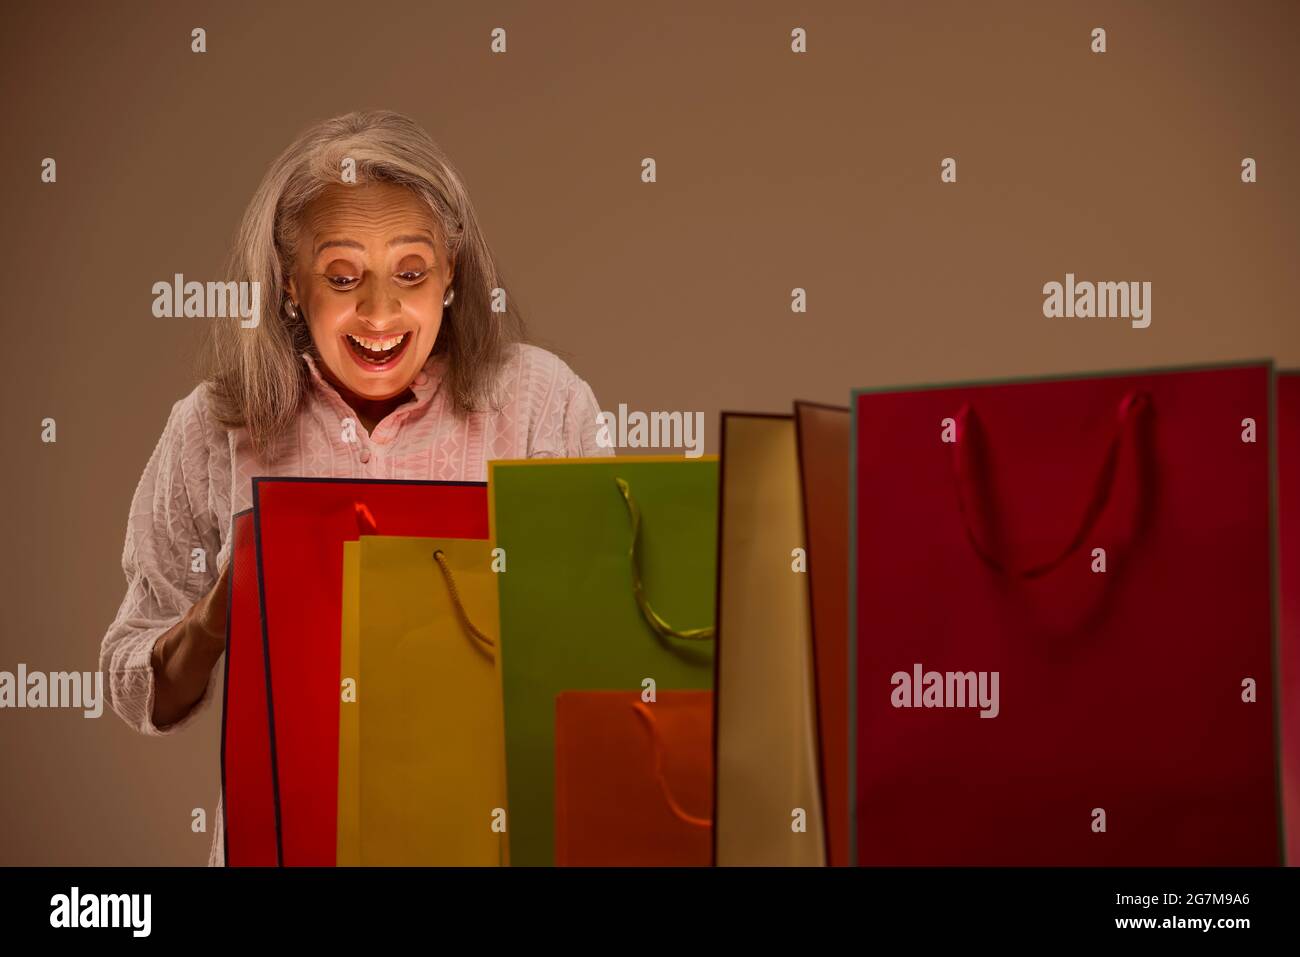 An old woman elated by looking into her Carry bags. Stock Photo